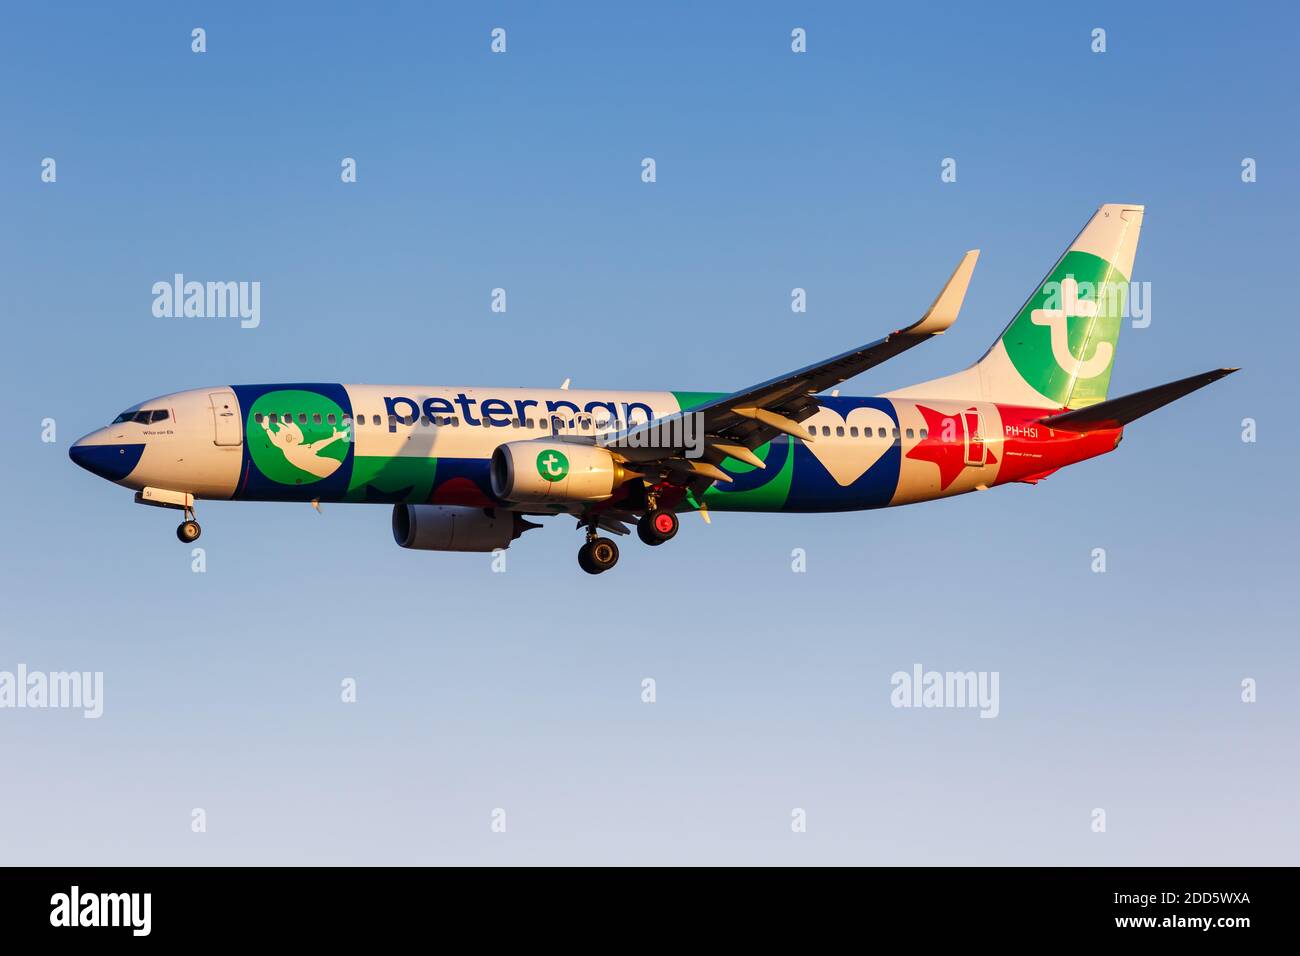 Athens, Greece - September 21, 2020: Transavia Boeing 737-800 airplane in the Peter Pan special colors Athens Airport in Greece. Stock Photo